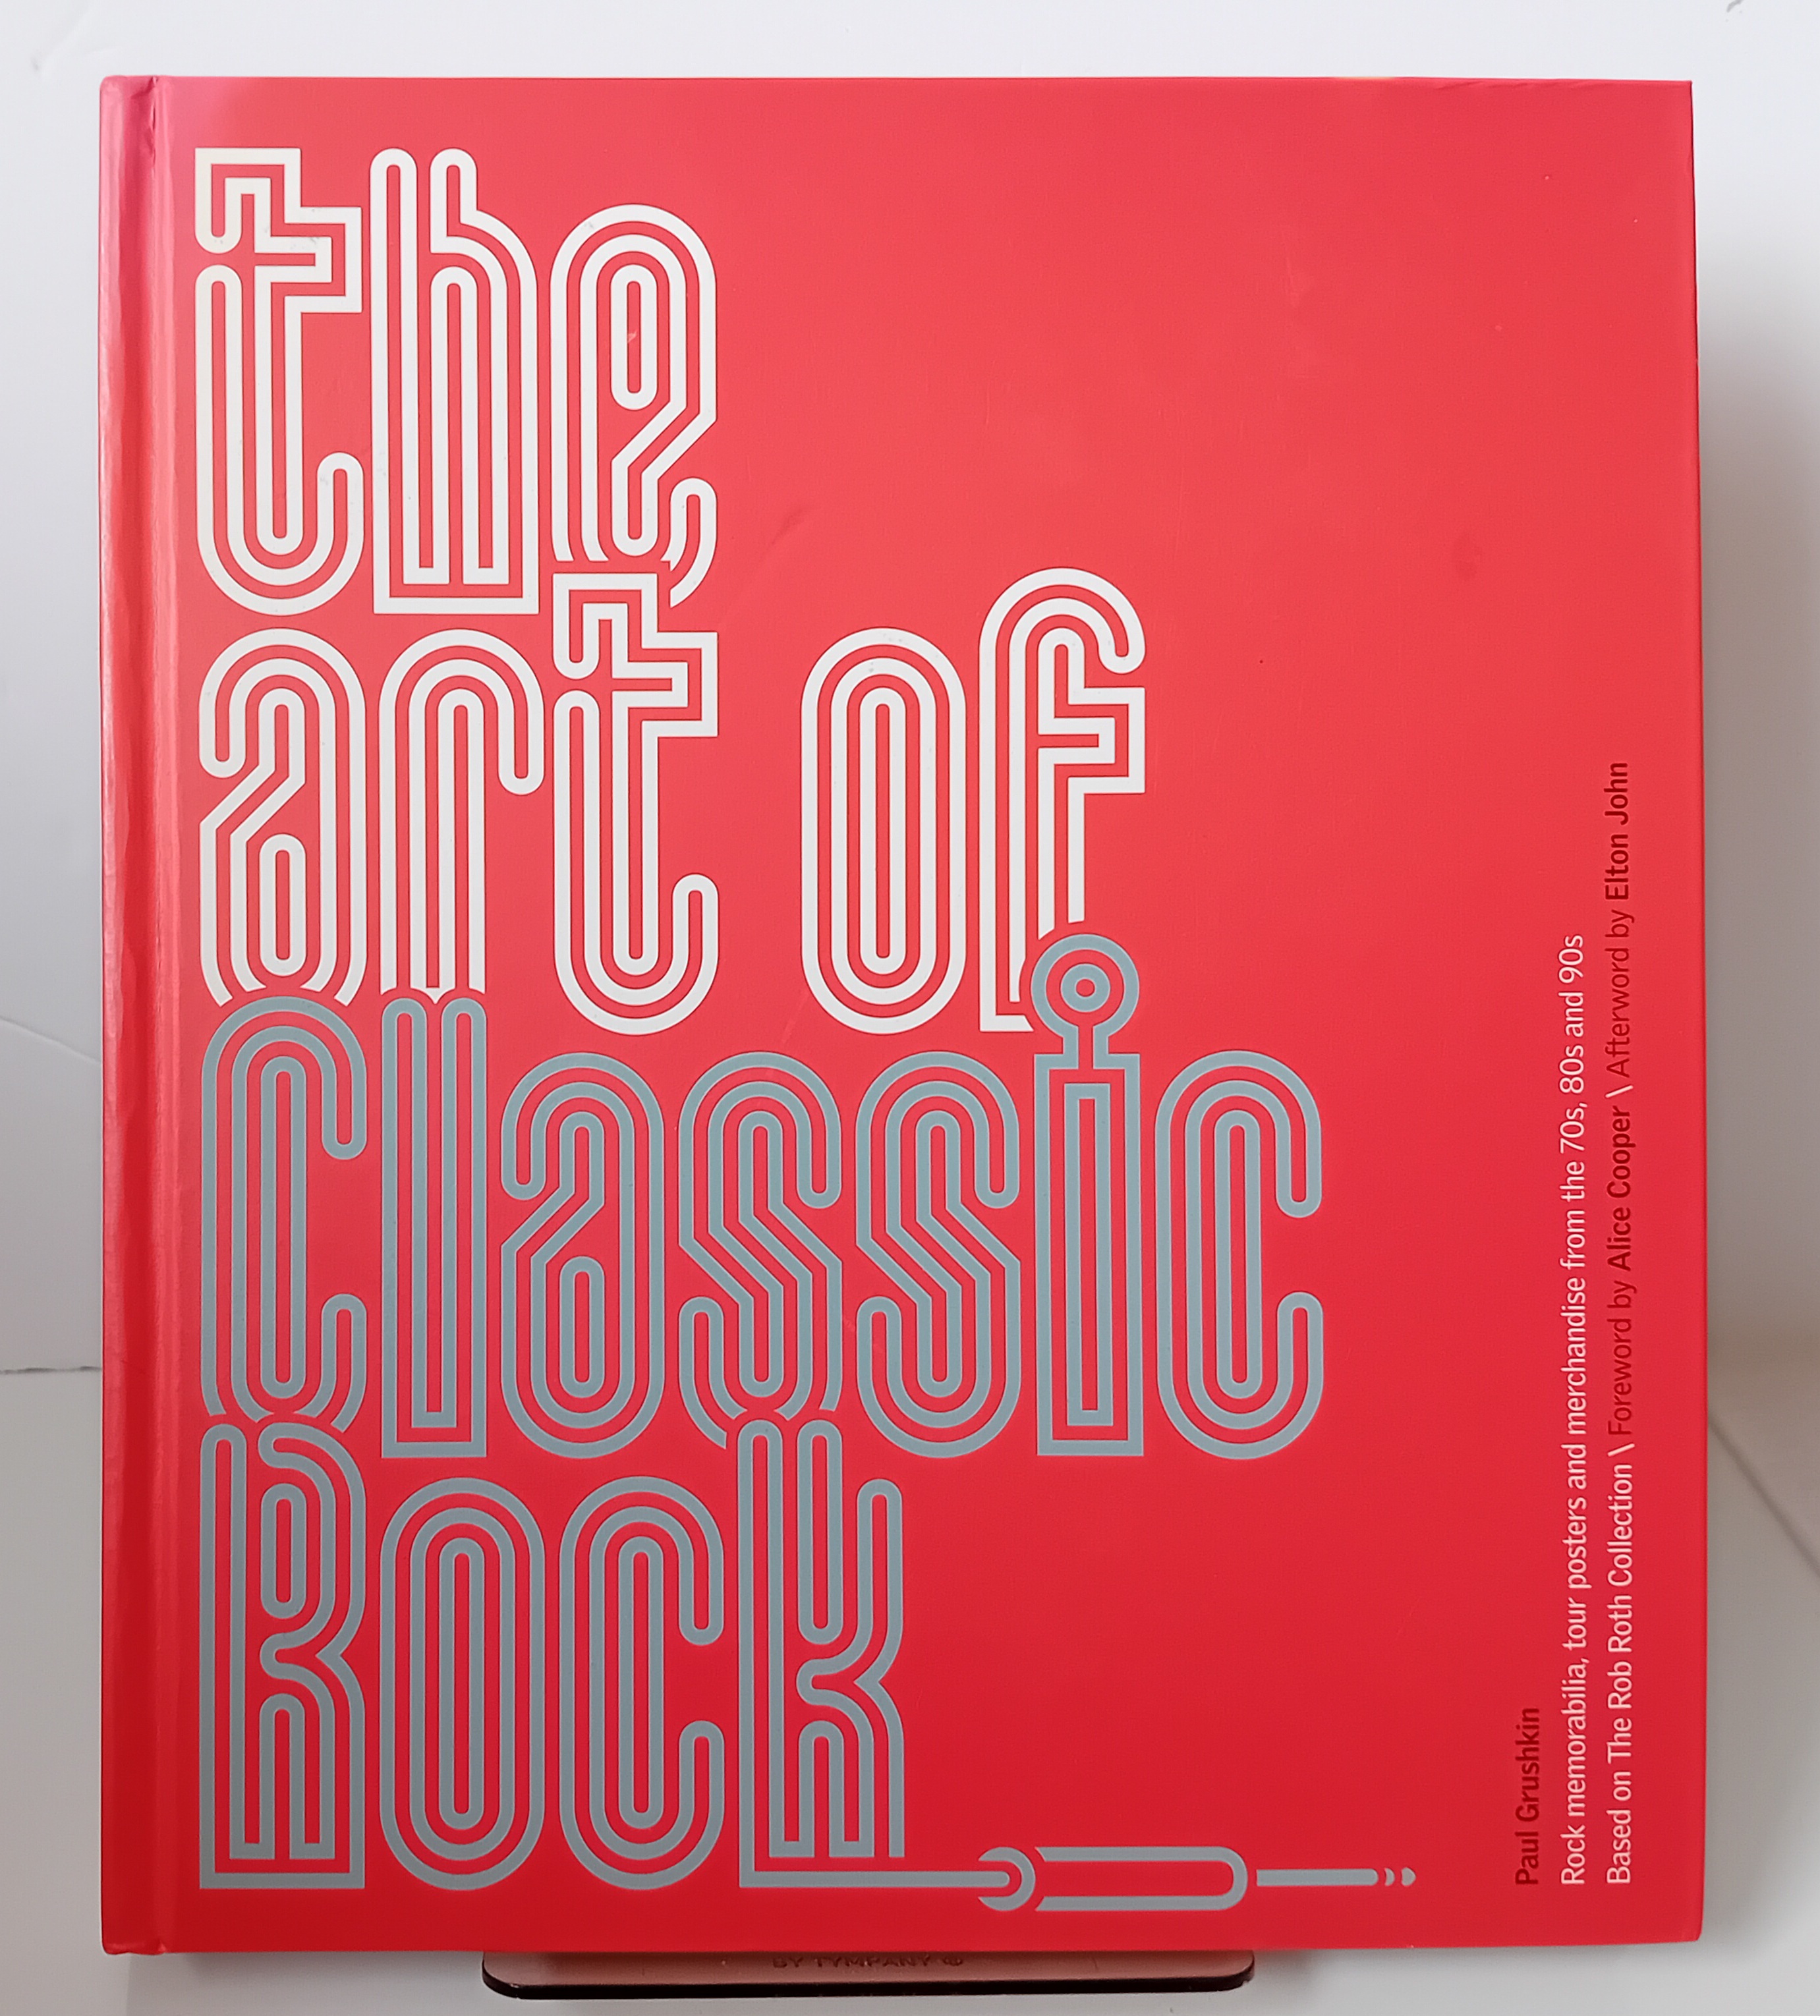 The Art of Classic Rock (The Rob Roth Collection) - Paul Grushkin; Robert Jess Roth